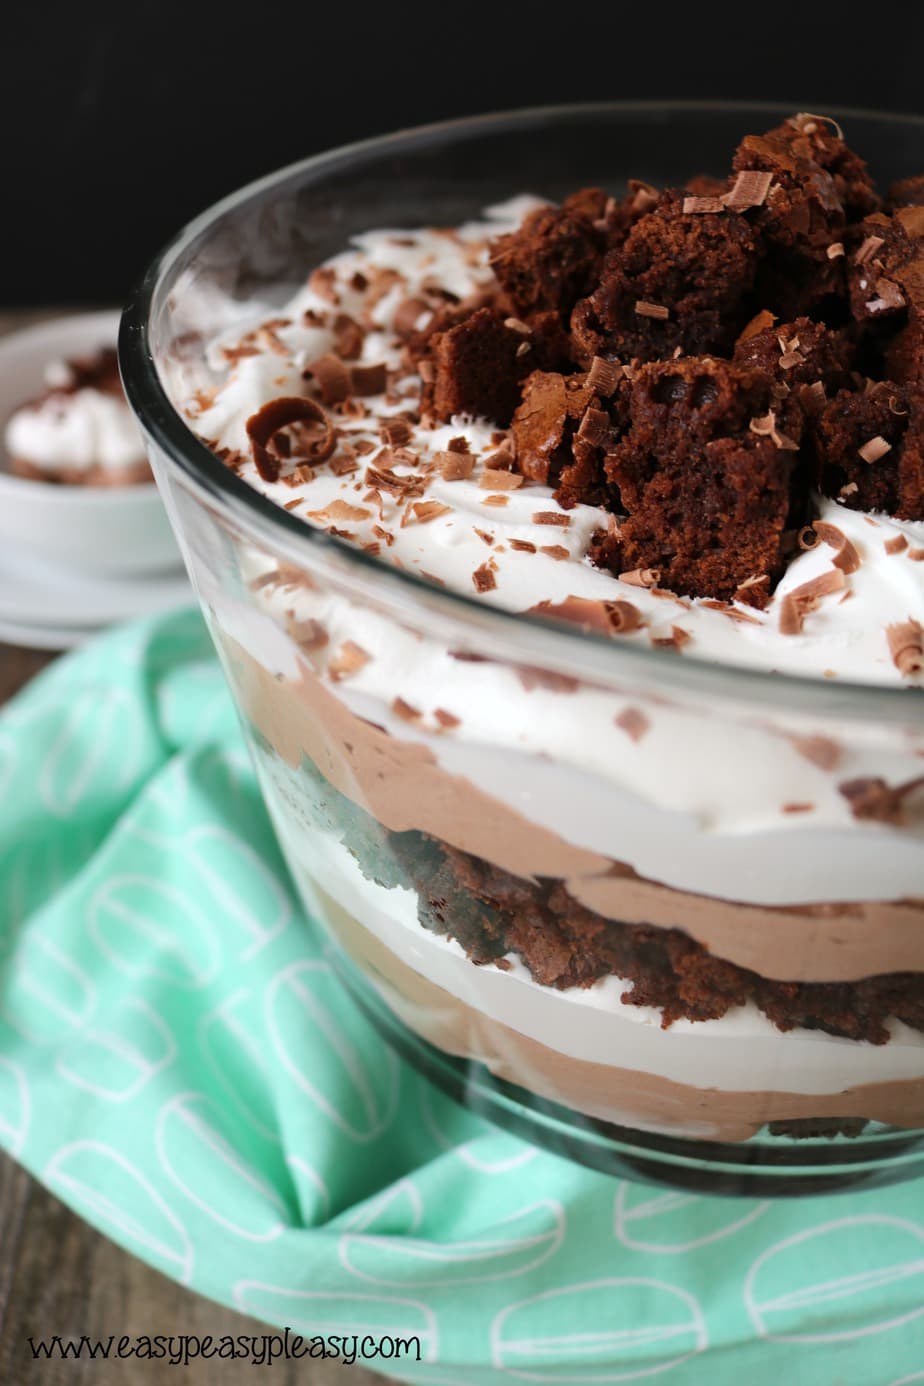 You can totally make this Chocolate Brownie Trifle with ease and impress your family and guests.